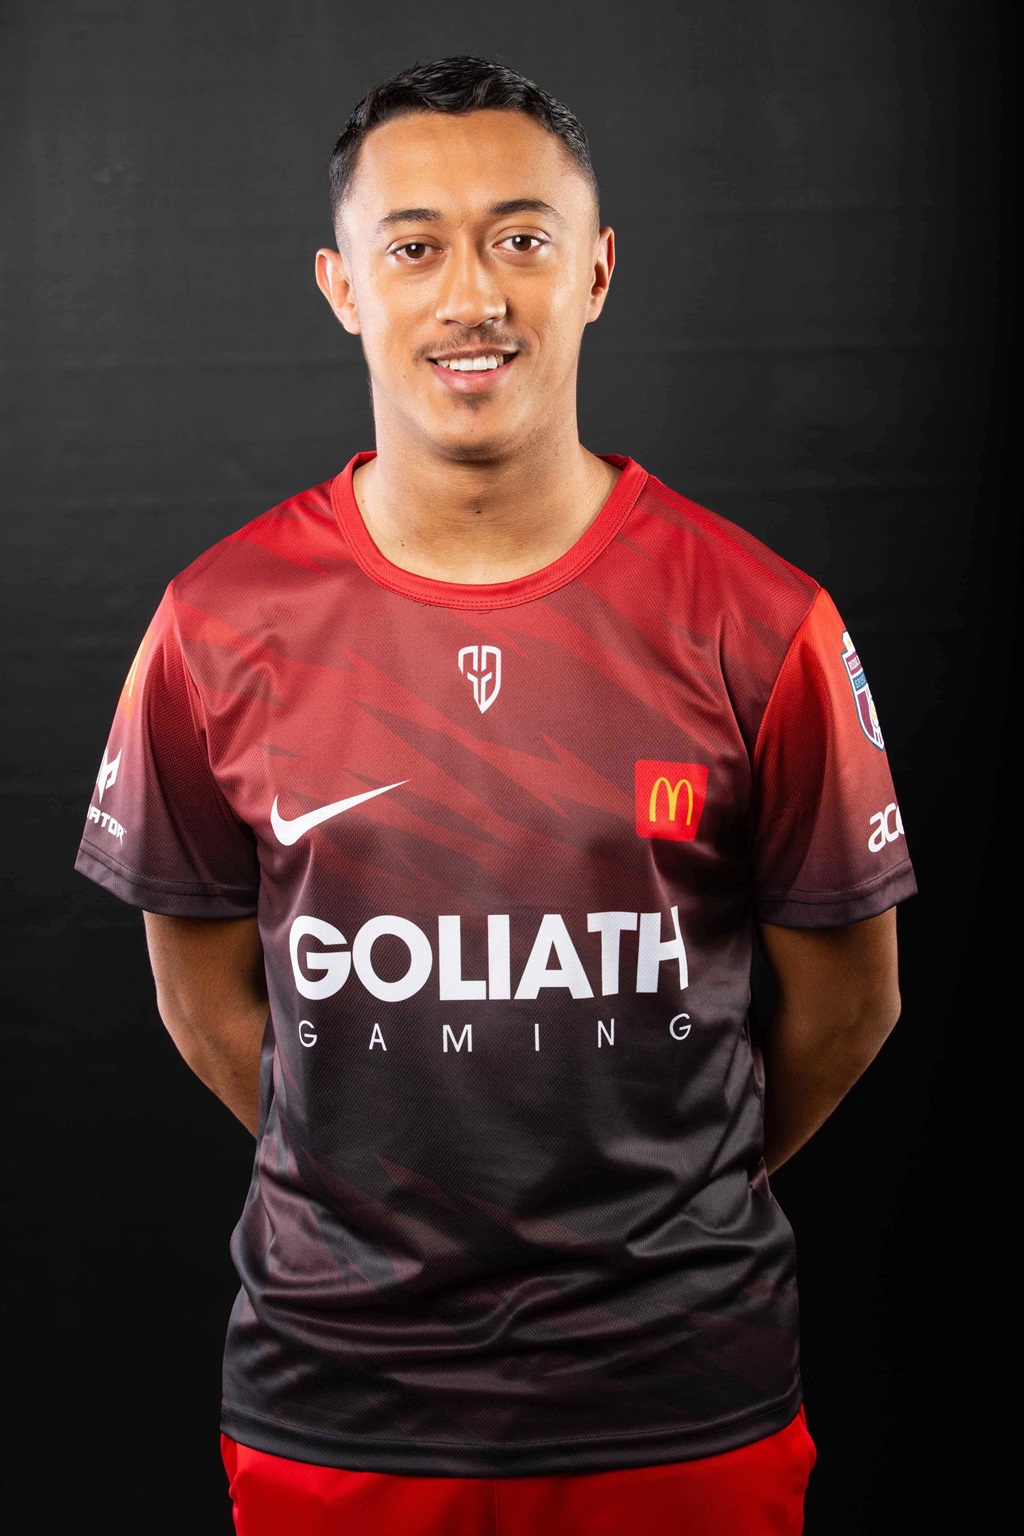 FIFA team captain for Goliath Gaming Julio Bianchi, is leading the charge in searching for the next FIFA superstars in Mzansi.